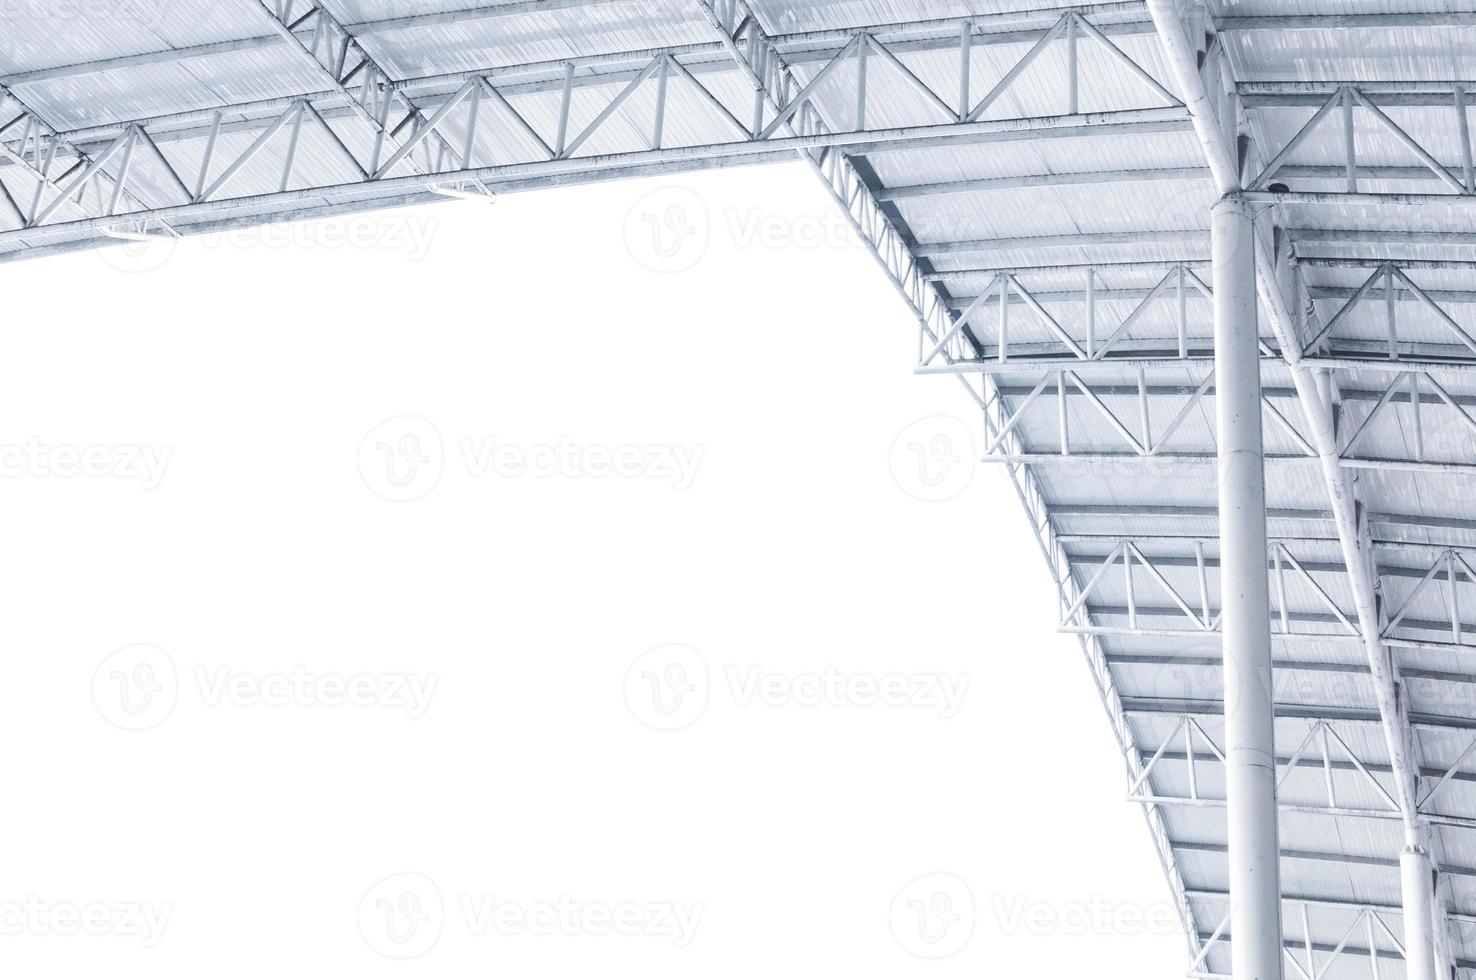 Large steel structure truss, roof frame and metal sheet in building construction site photo